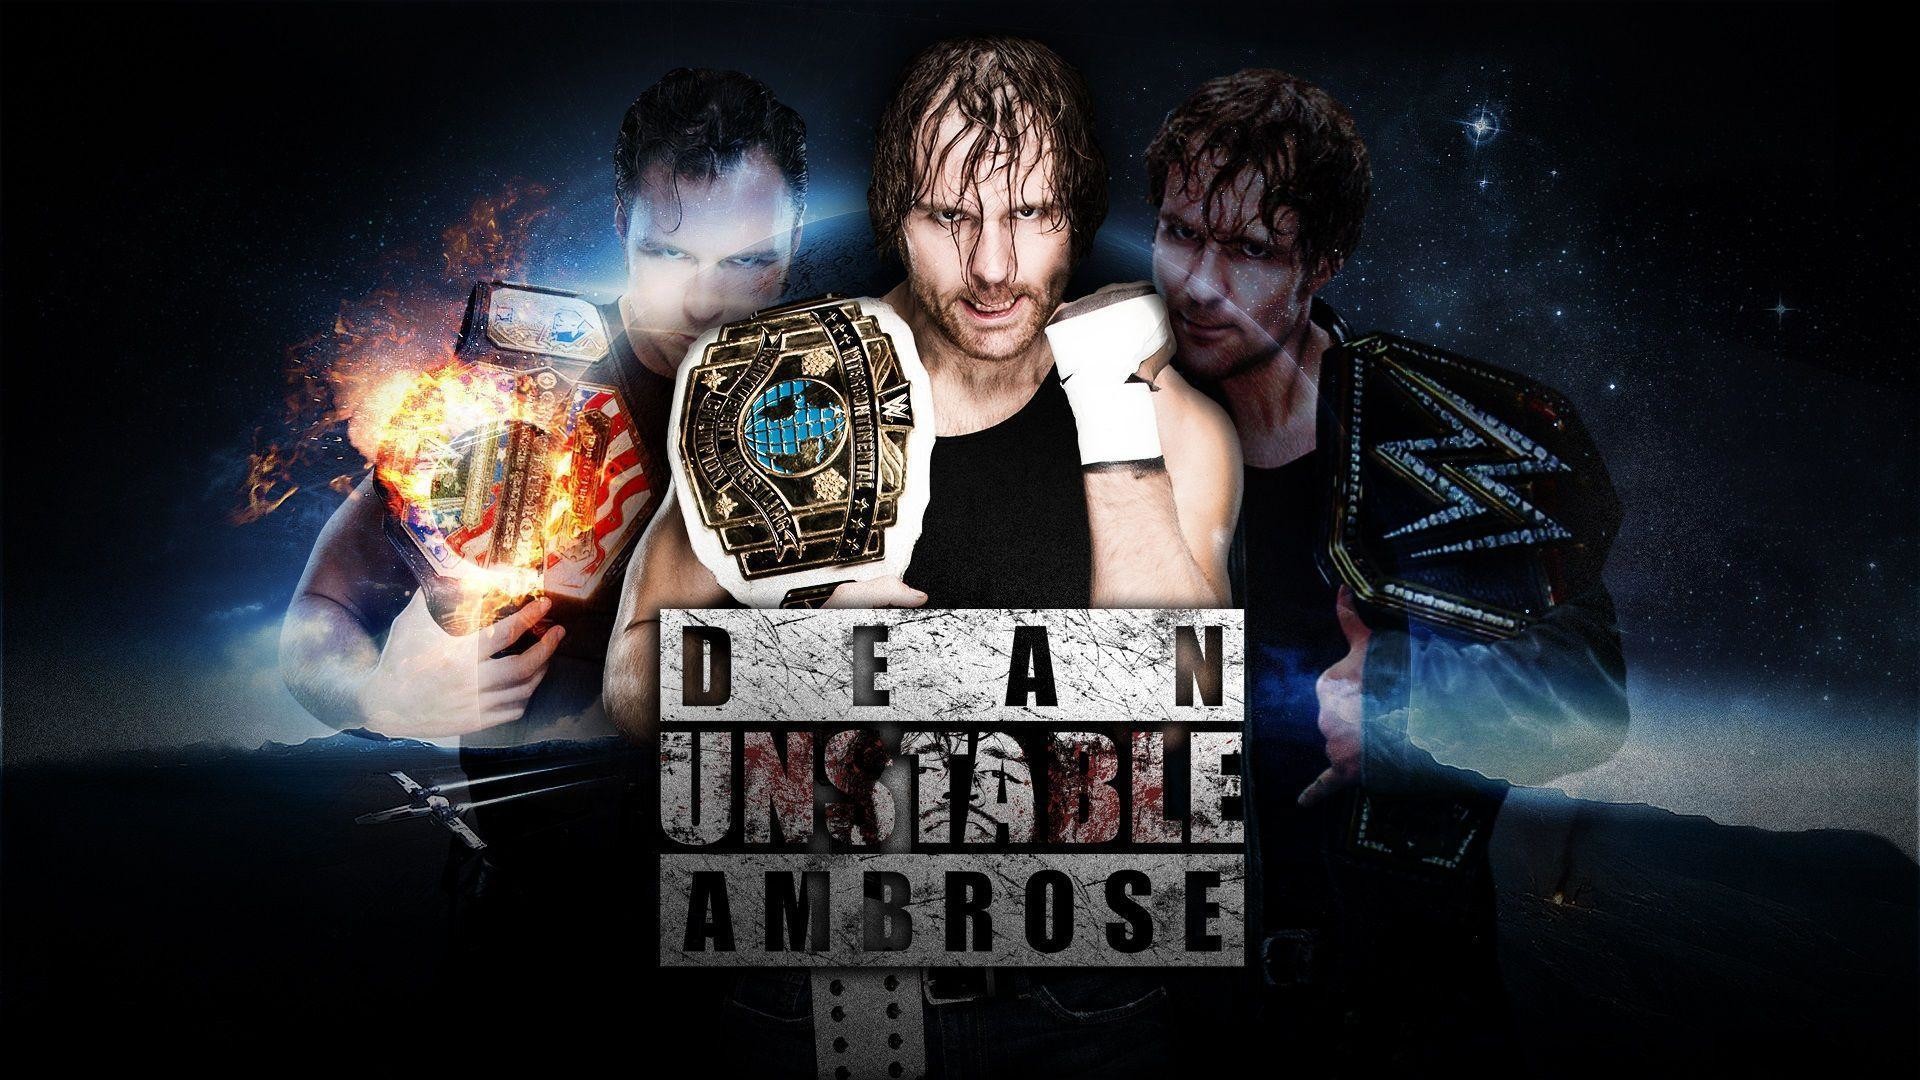 1920x1080 High Quality Dean Ambrose Wallpaper | One HD Wallpaper Pictures .